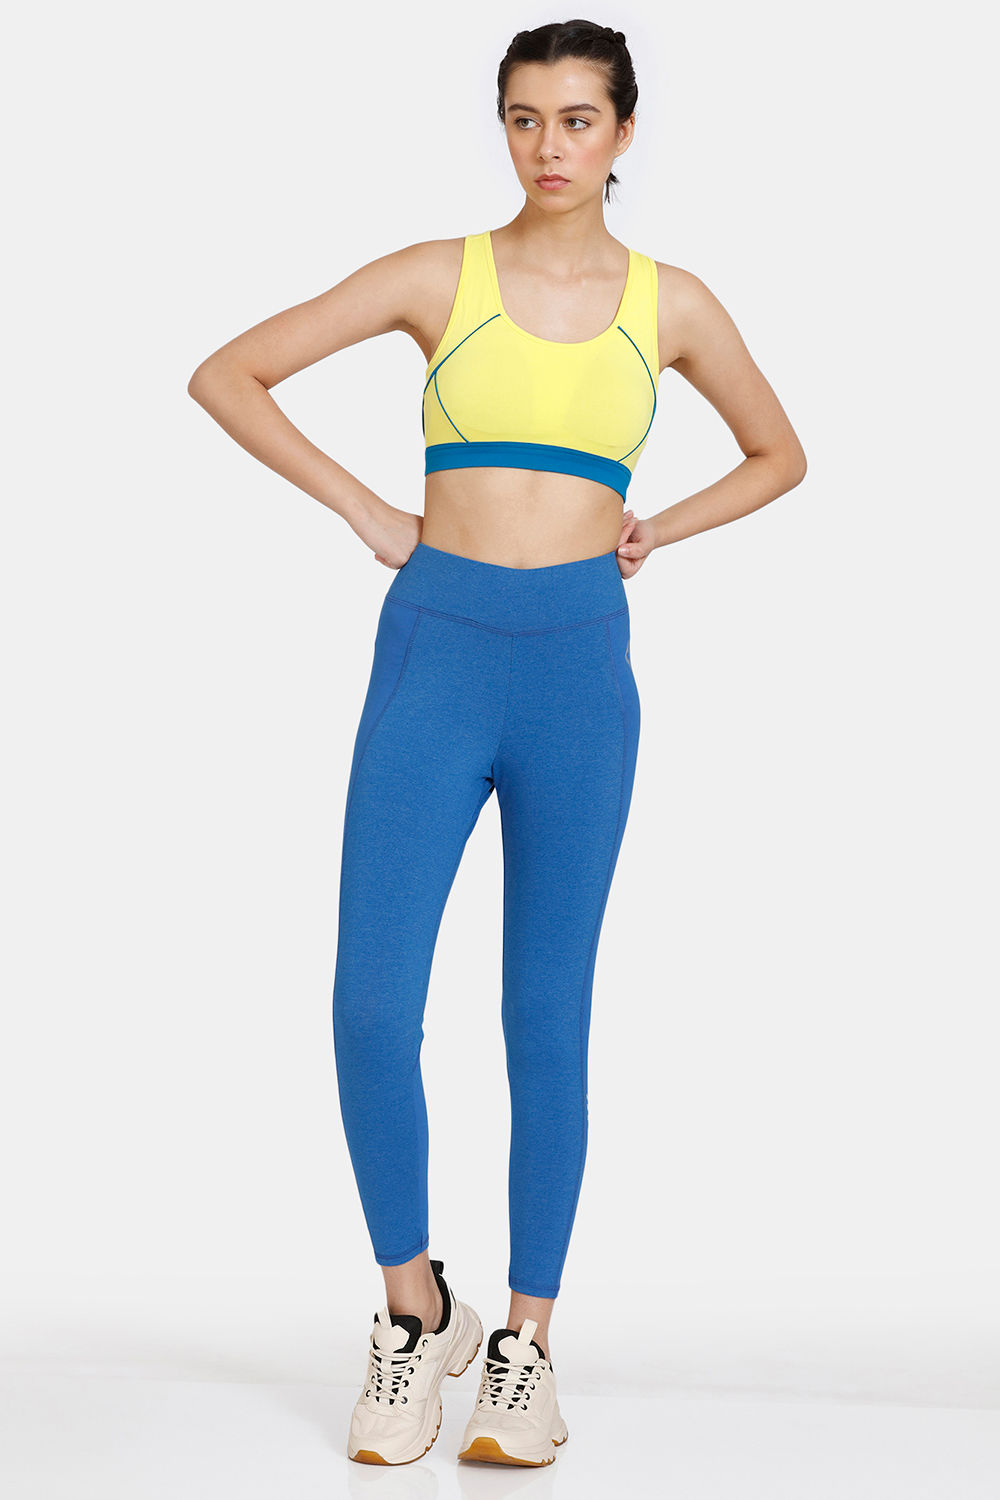 Zivame - Sports Bras to Leggings, Tanks-n-Tees to Joggers & Shorts, all  your favorite Activewear pieces are at upto 70% Off🤸🏻 Supportive,  quick-dry, super-stretchable: all that you can ask for, at the